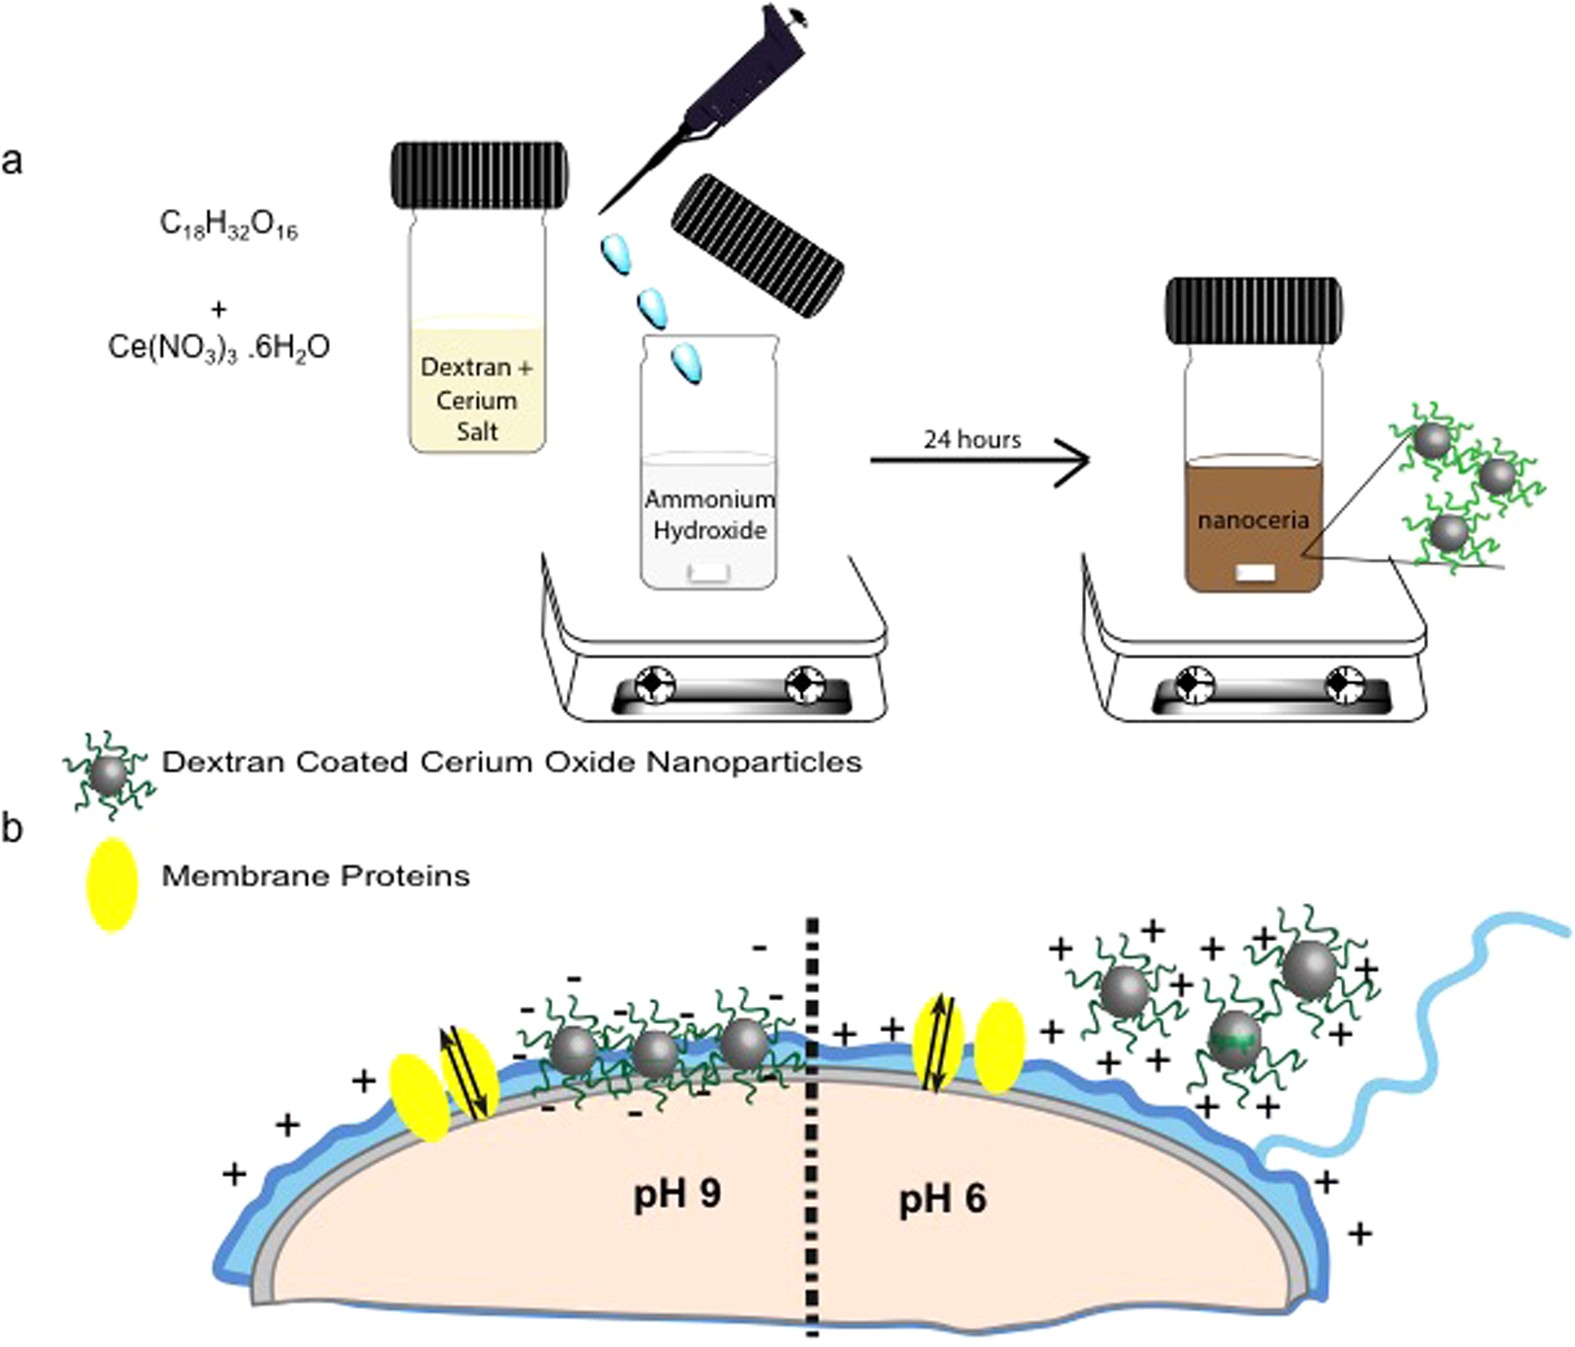 pH-Controlled Cerium Oxide Nanoparticle Inhibition of Both Gram